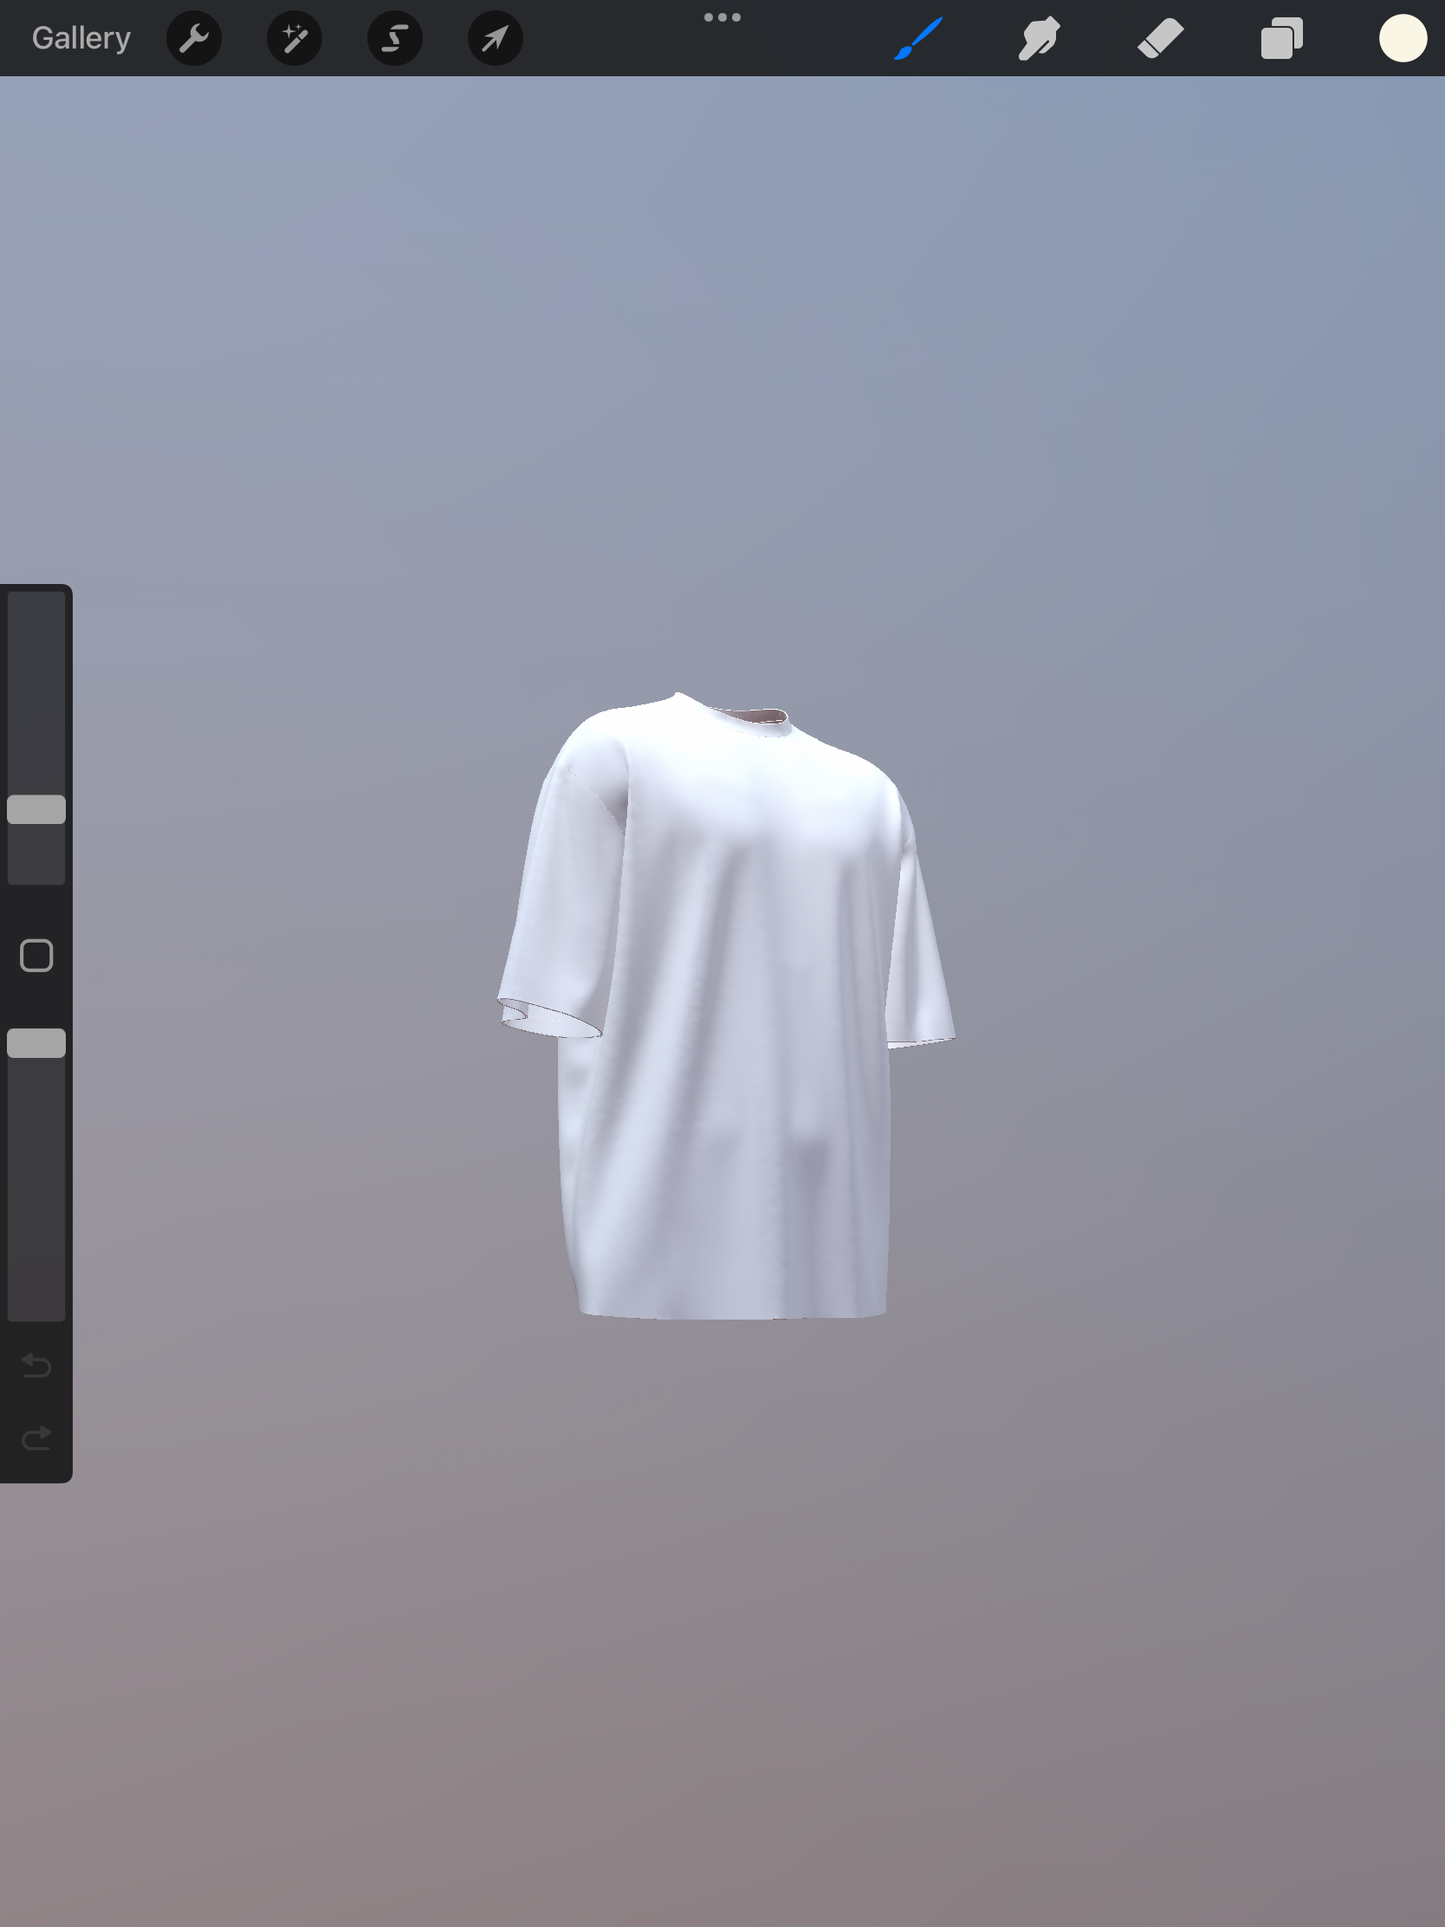 3D Oversized Shirt file with textures